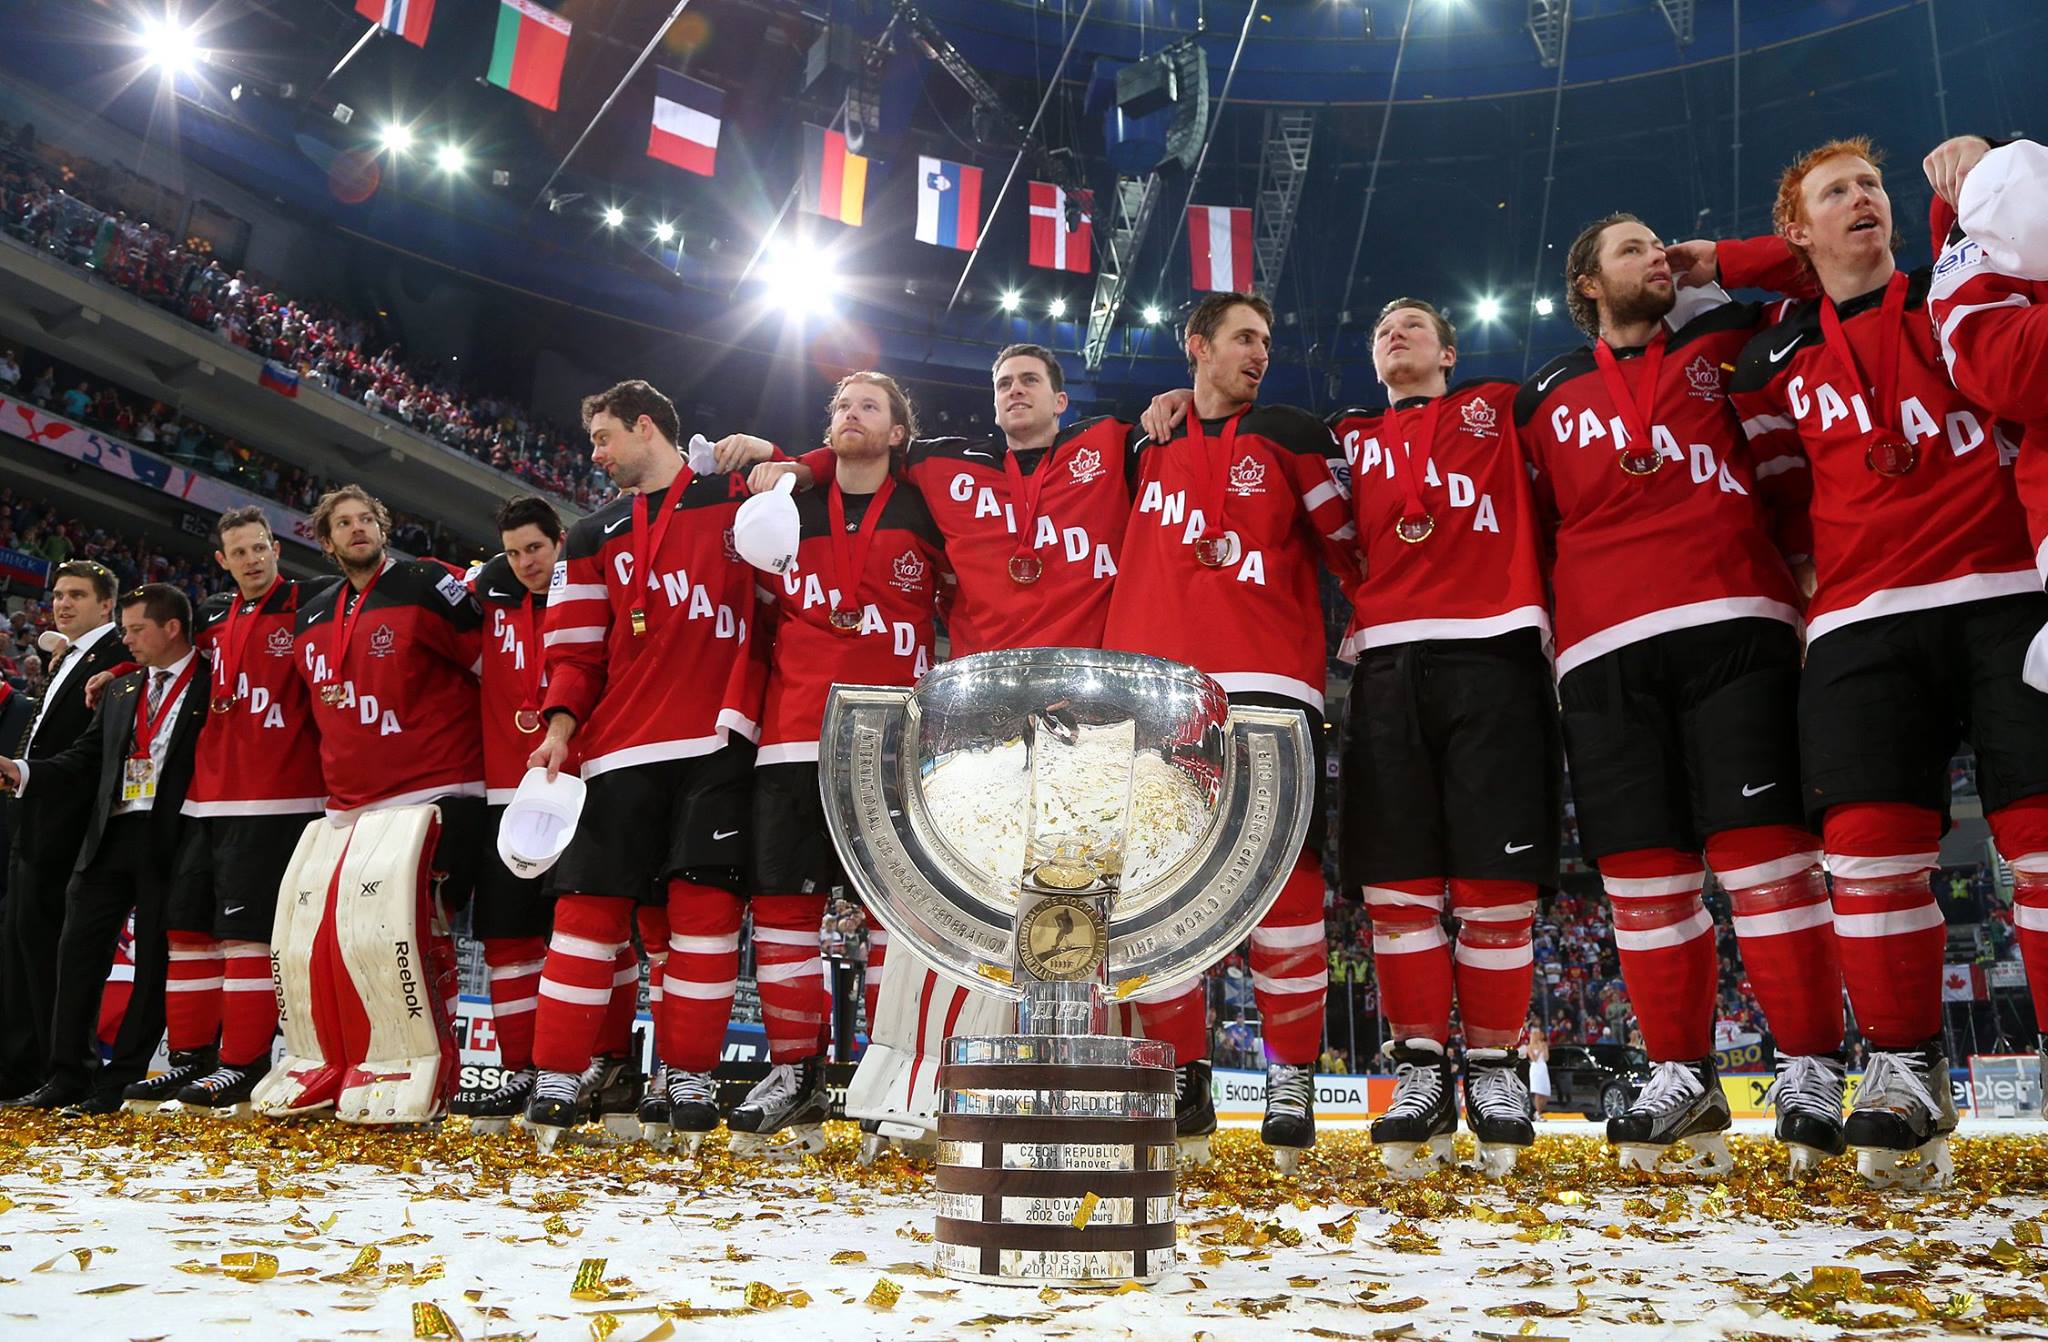 TSN and RDS Announce Multi-Year Media Rights Extension for IIHF ICE HOCKEY WORLD CHAMPIONSHIP